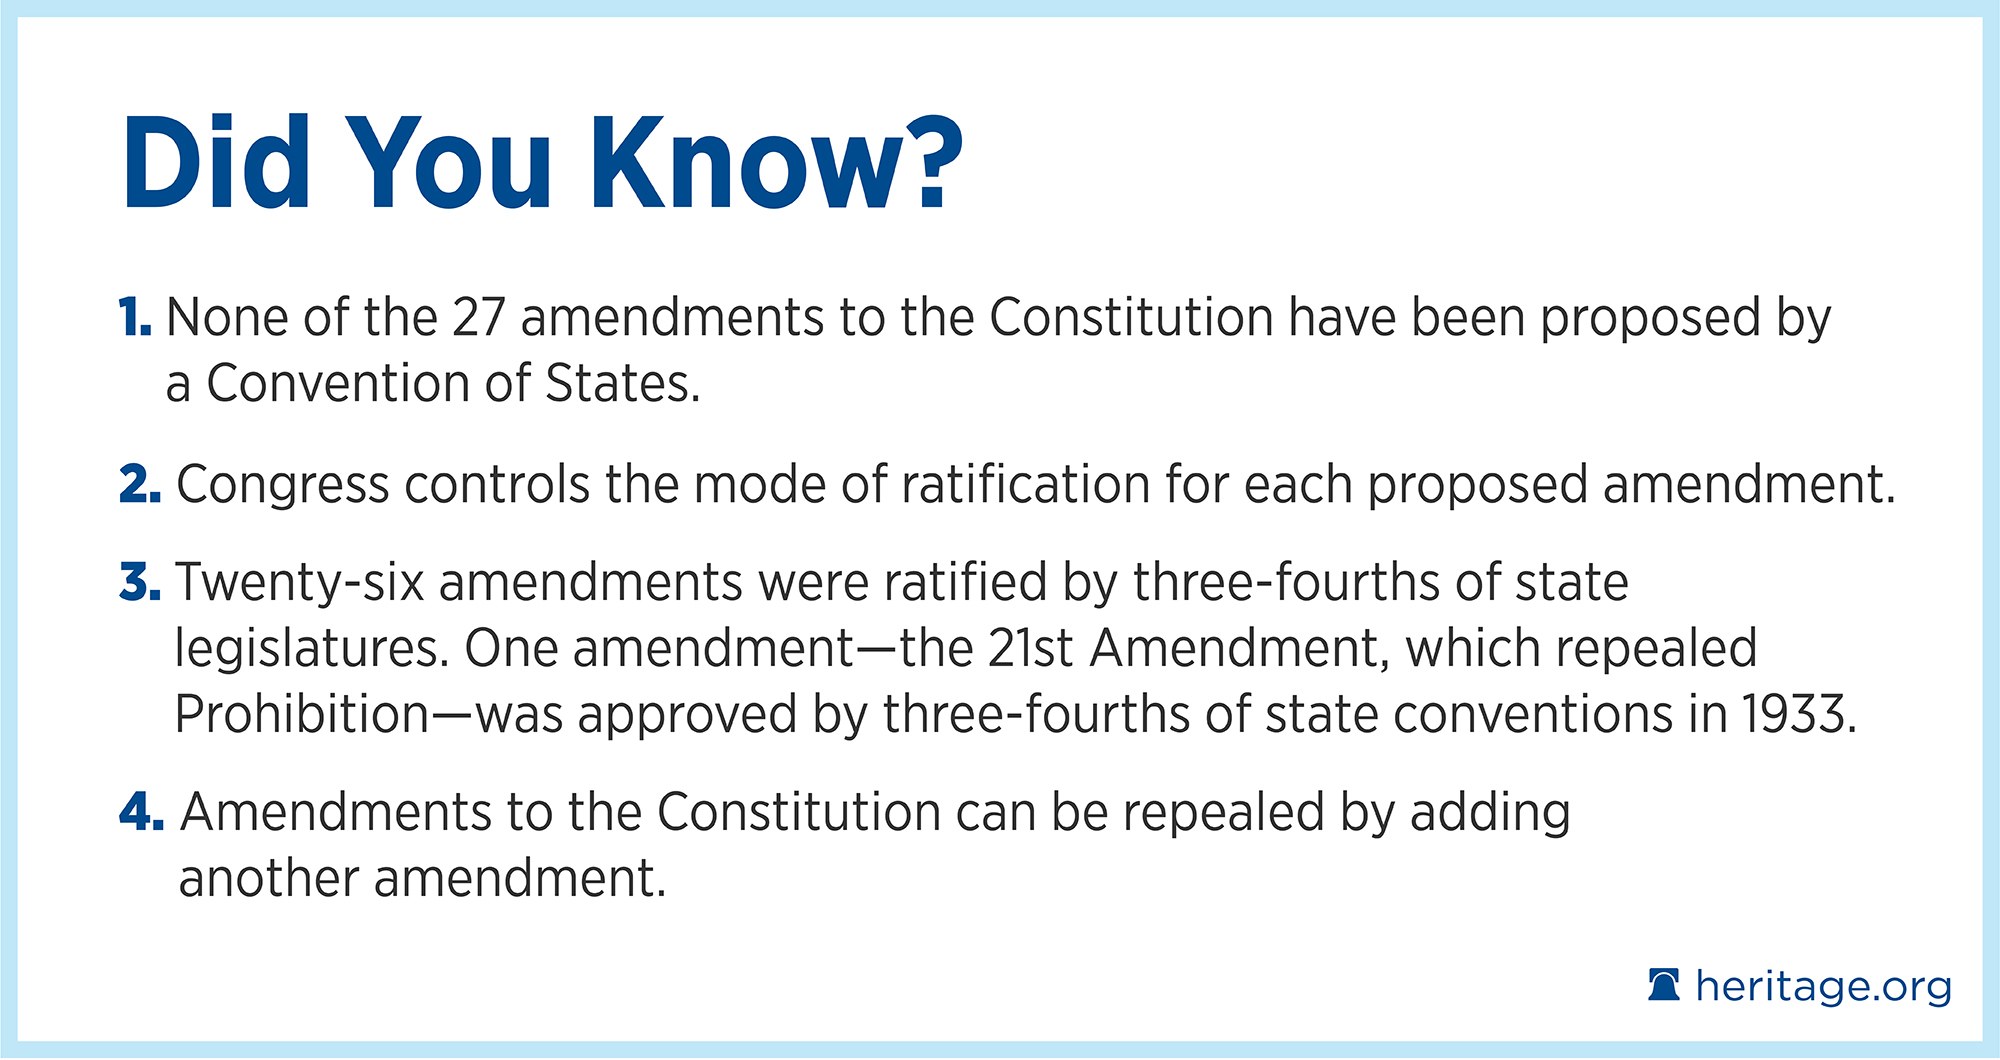 should the constitution be changed essay